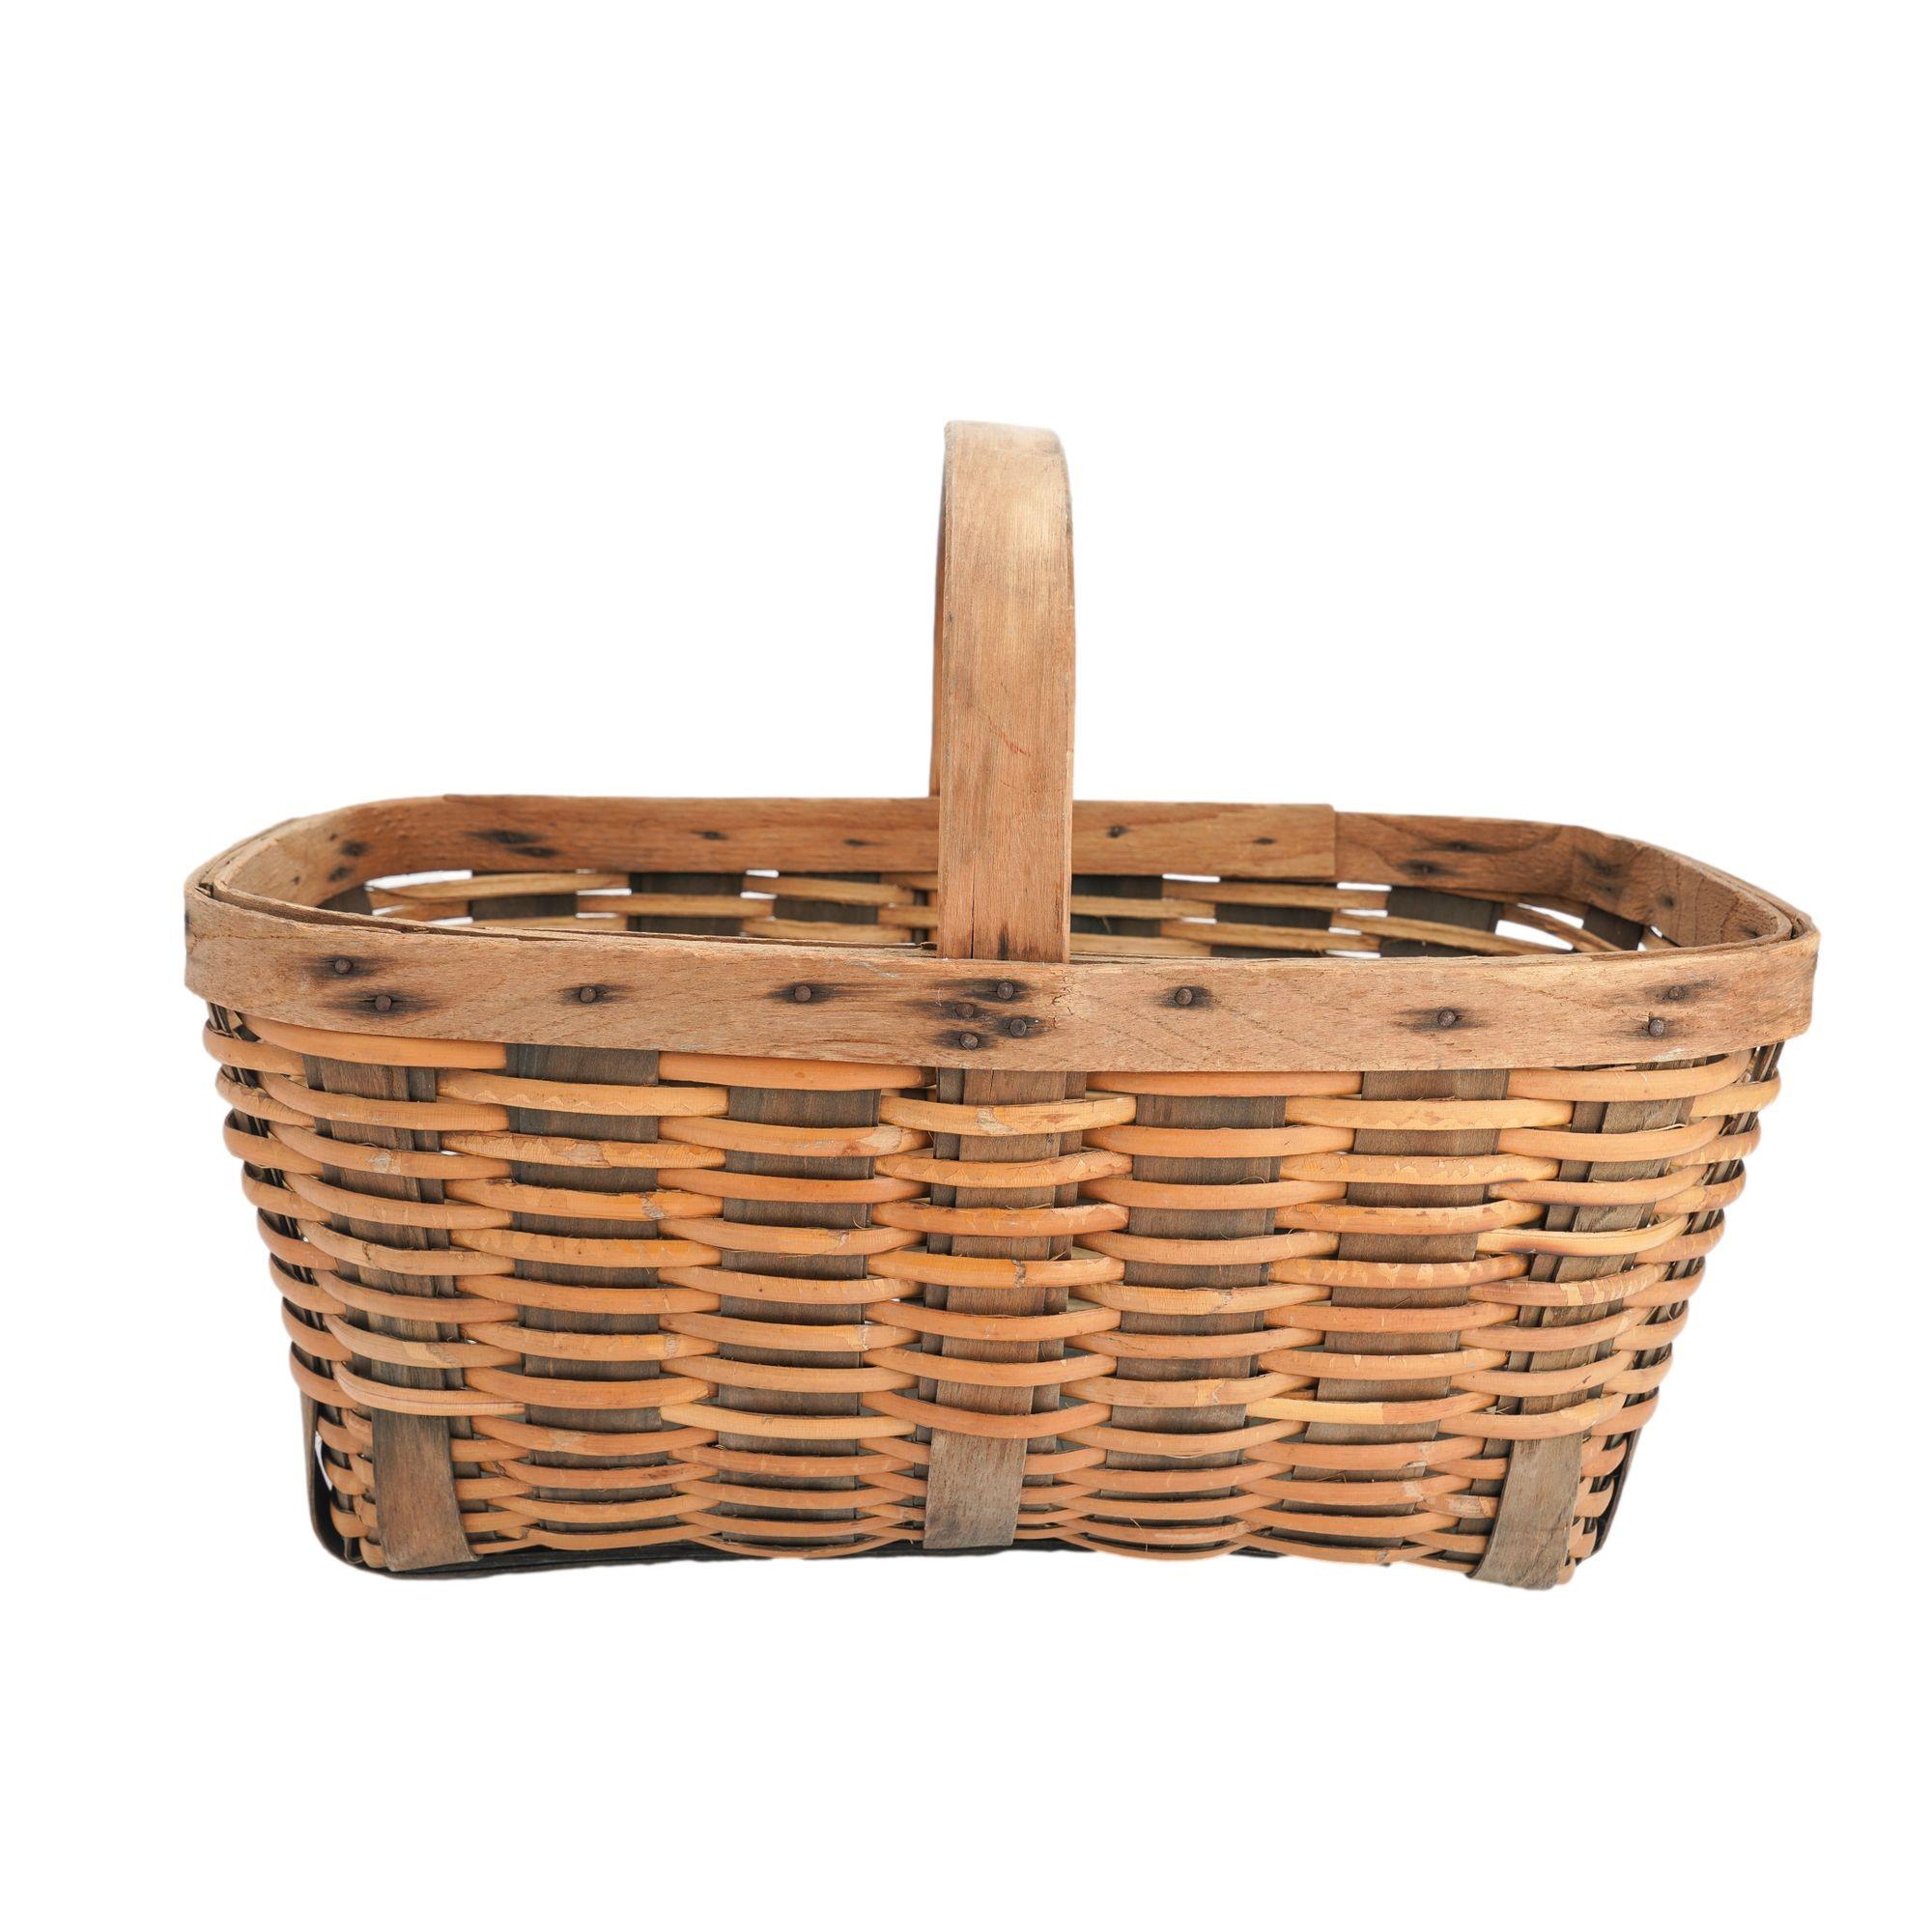 Vintage rectangular hand woven basket of bamboo with ash ribs which continue across the bottom, rim, and fixed loop handle. The rim and handle are attached with round head iron tacks.

Early 20th century.